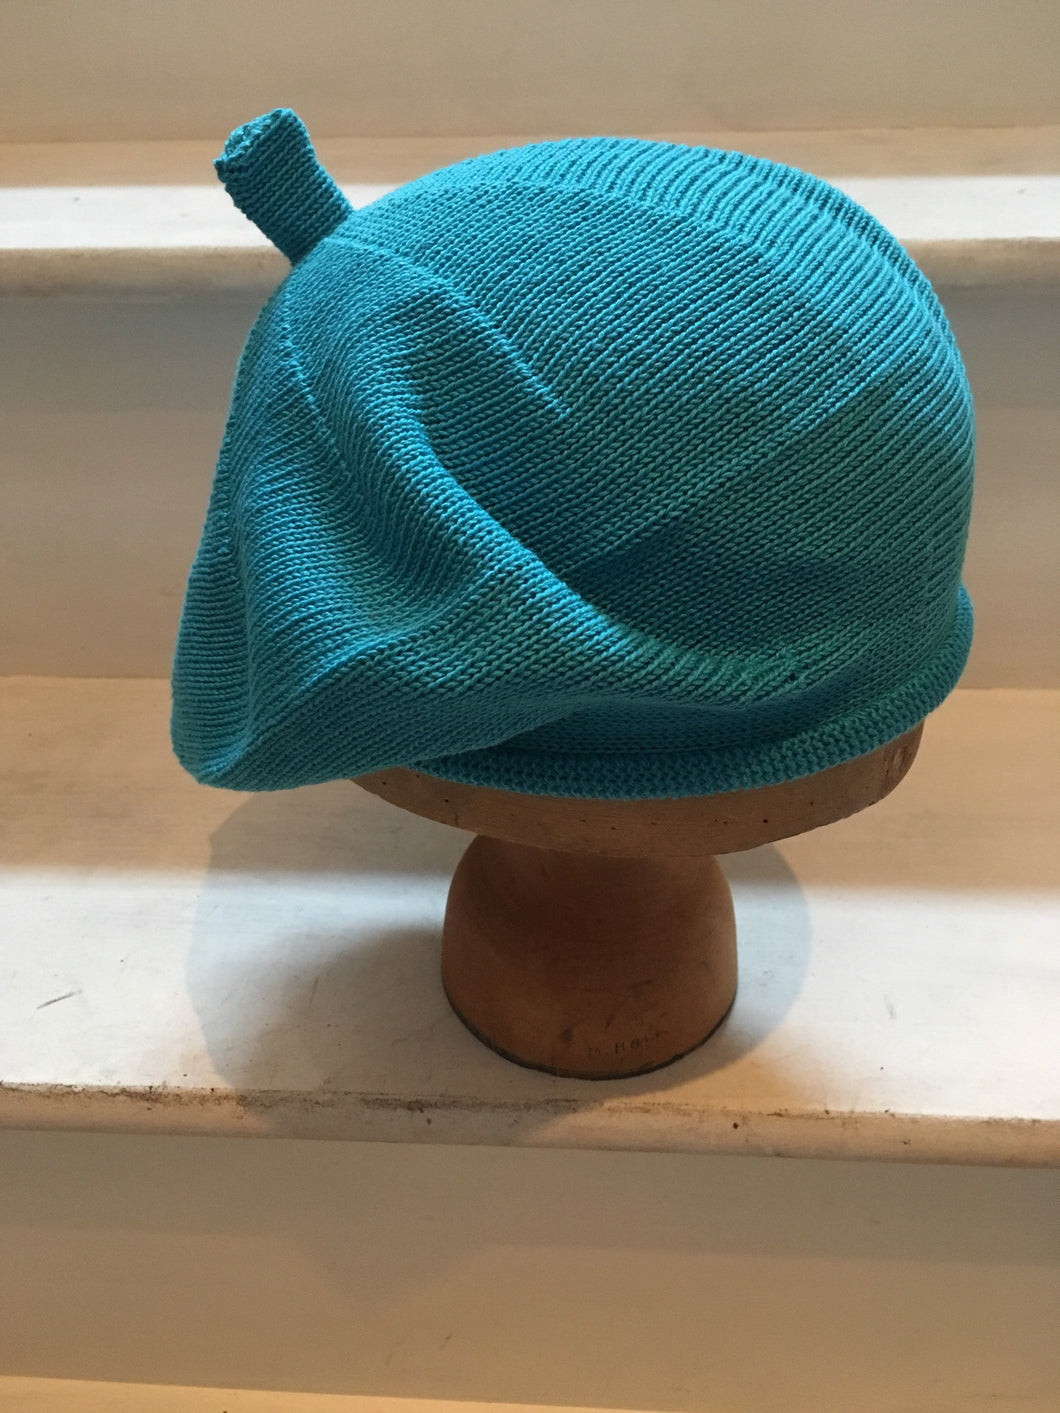 Turquoise Blue Cotton Knitted Beret for Women, with Tab at Top